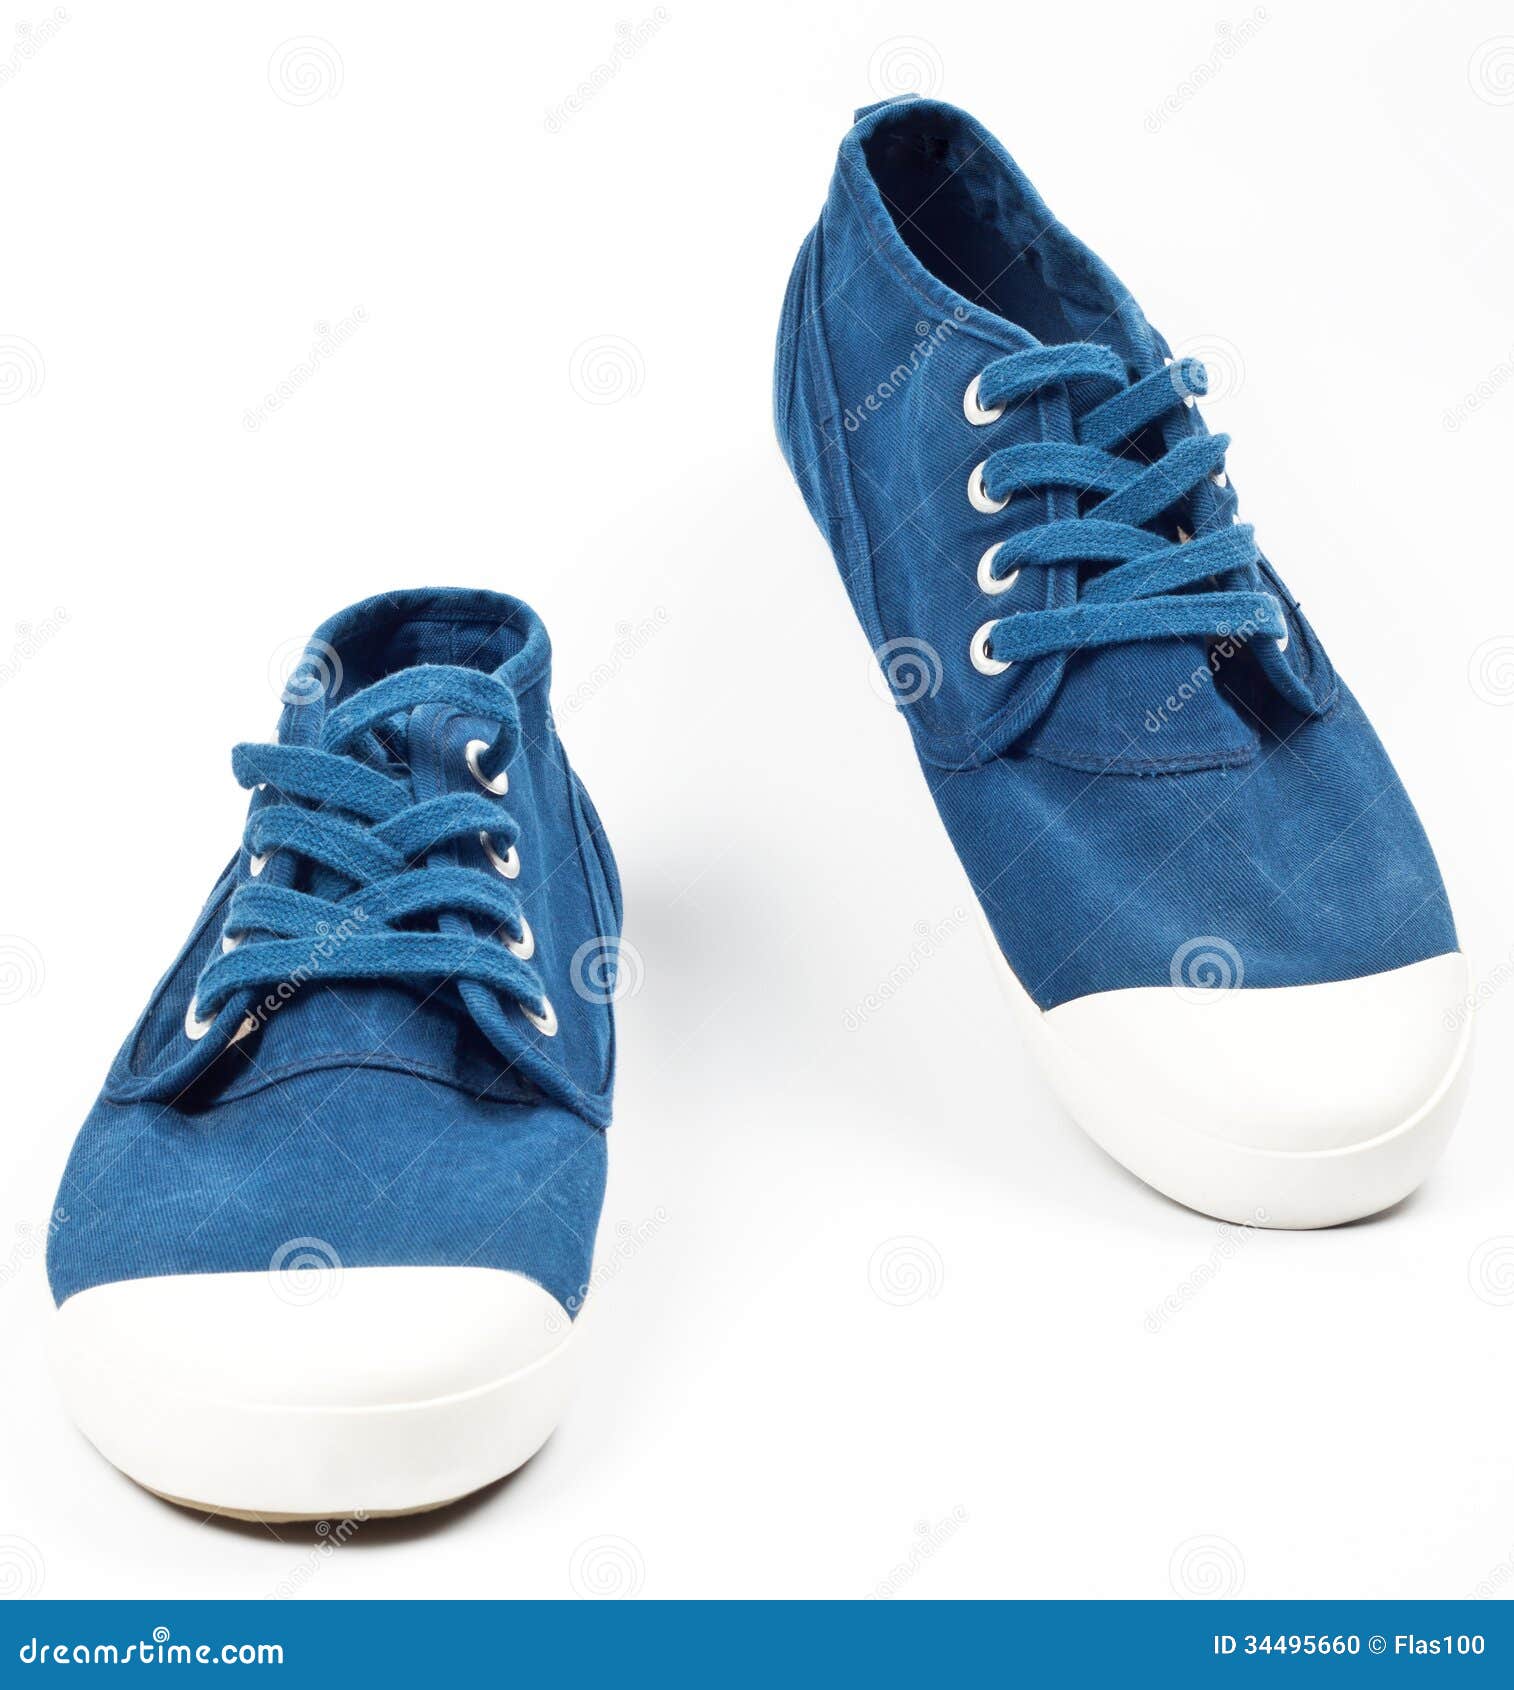 A pair of new blue shoes stock photo. Image of rubber - 34495660